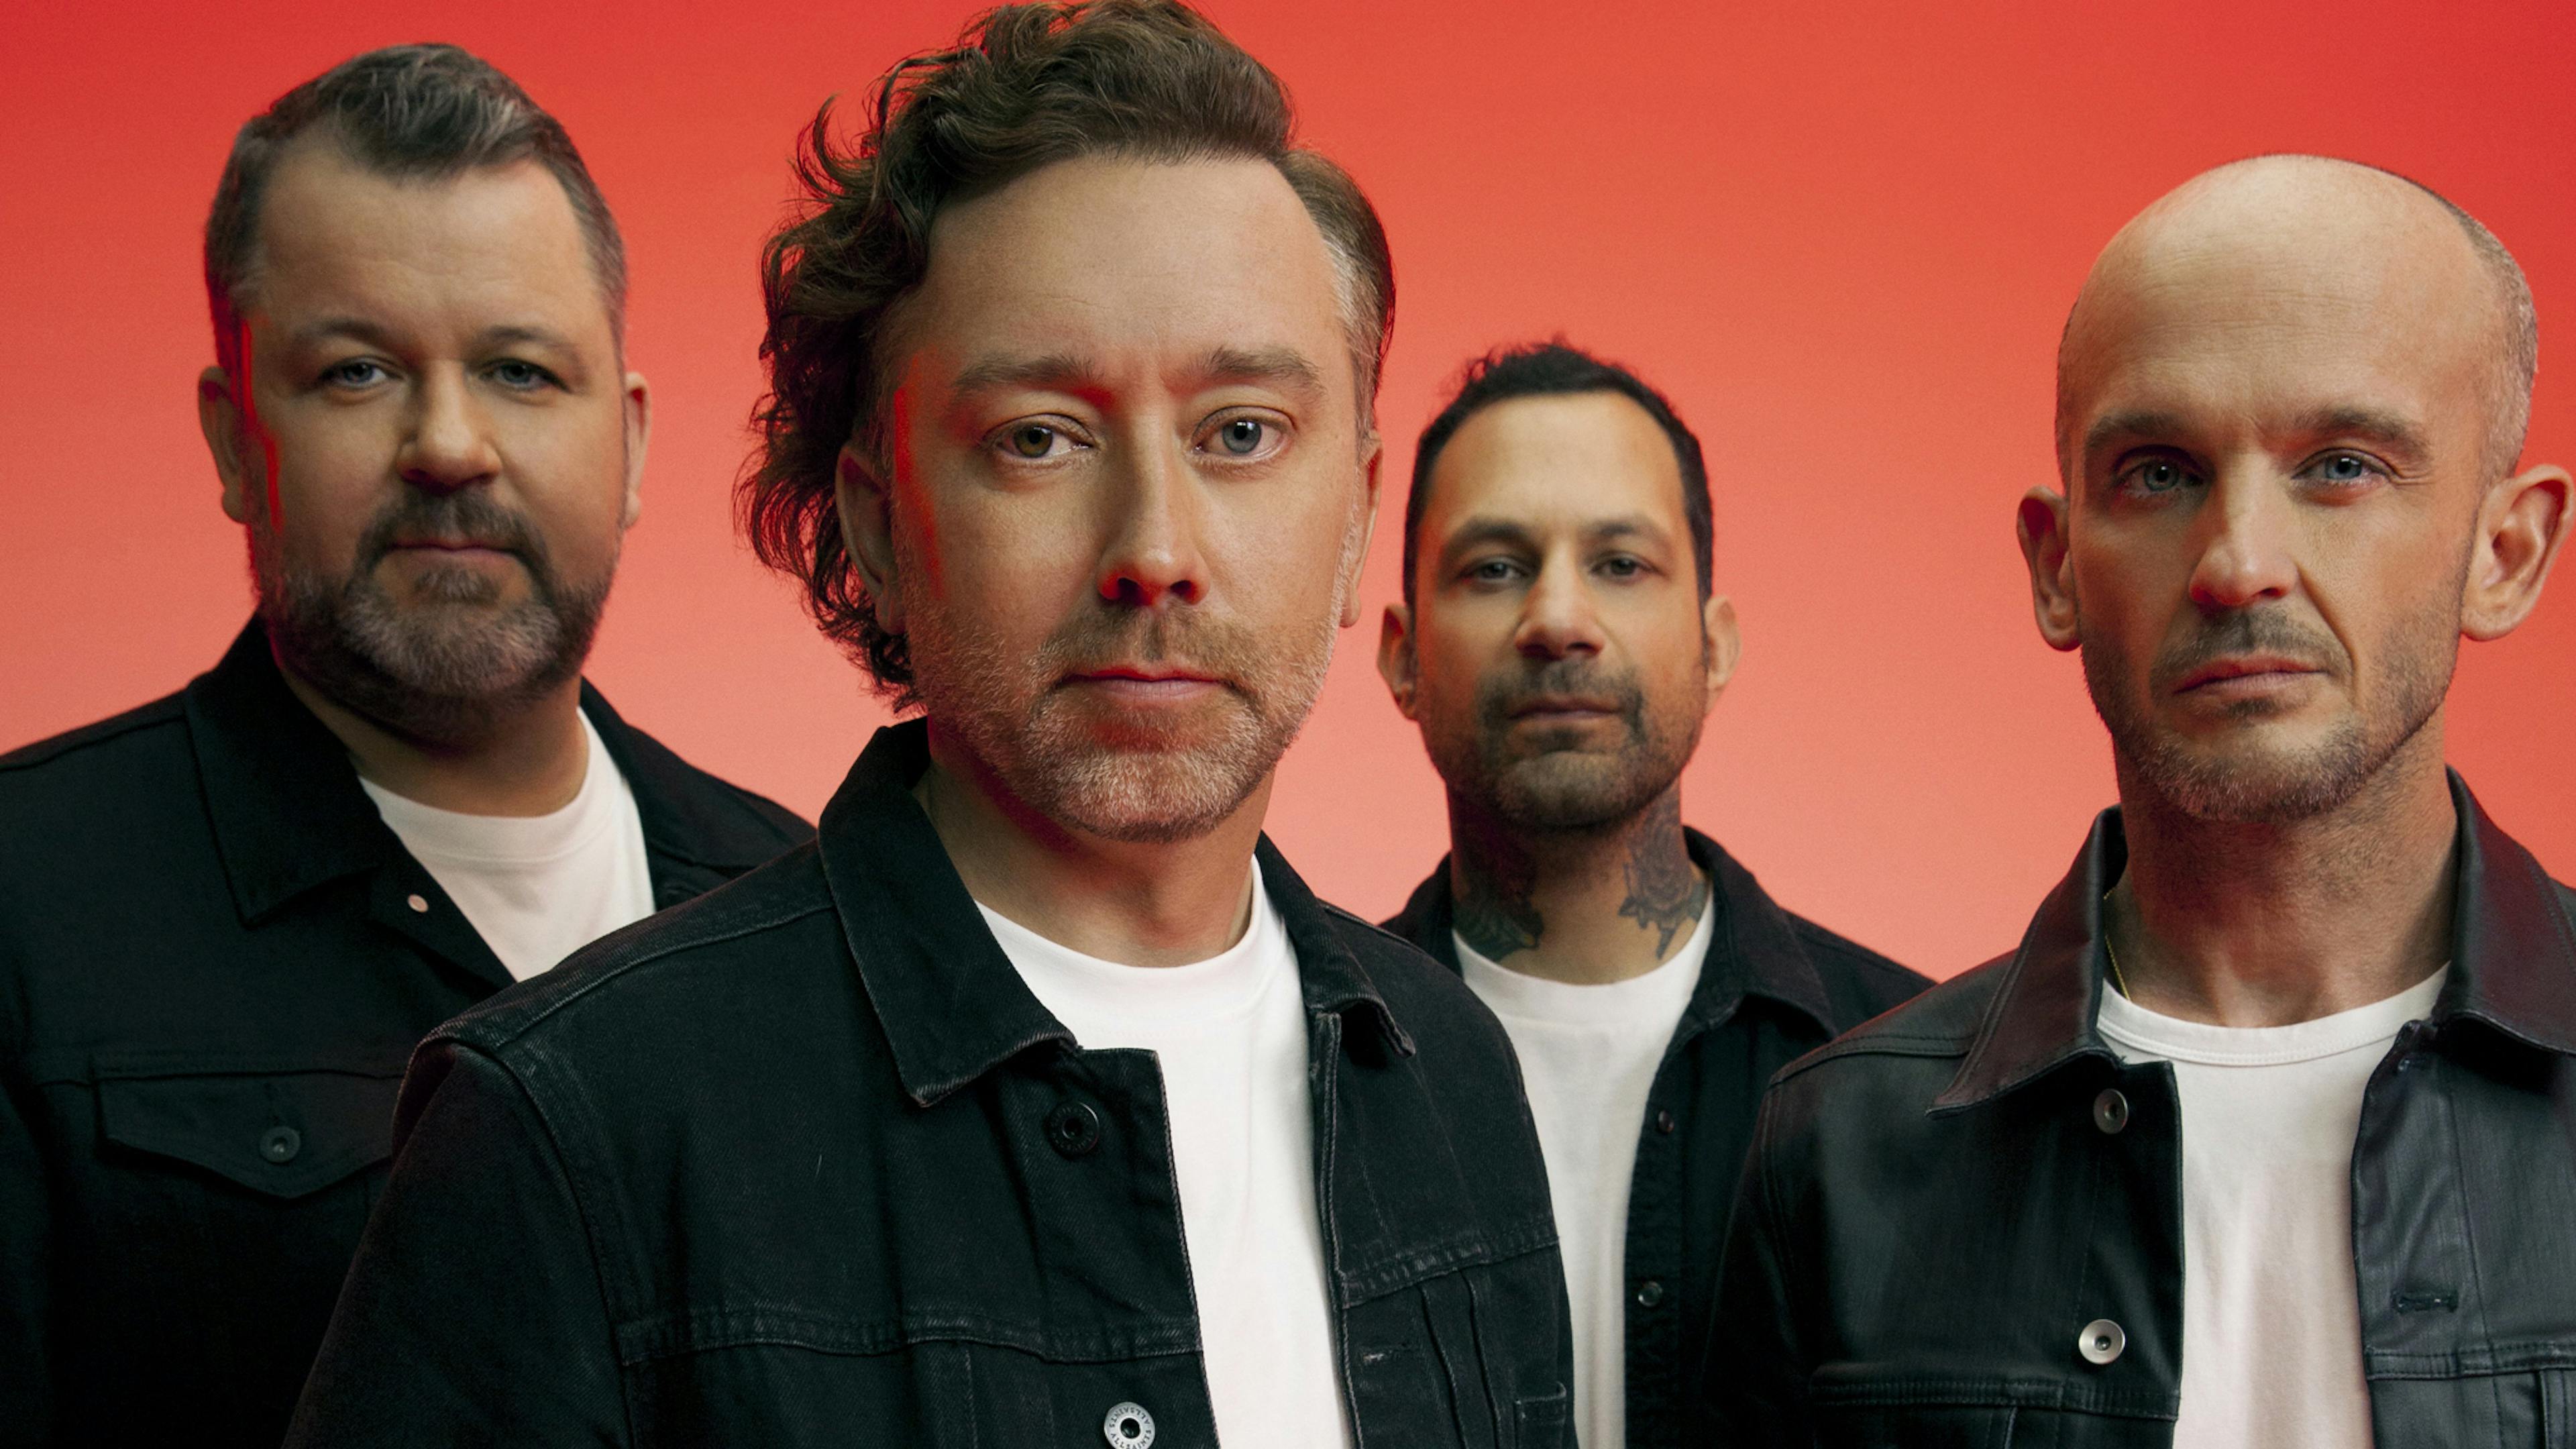 Rise Against announce North American tour where they’ll “dust off some songs we haven’t played in some time”